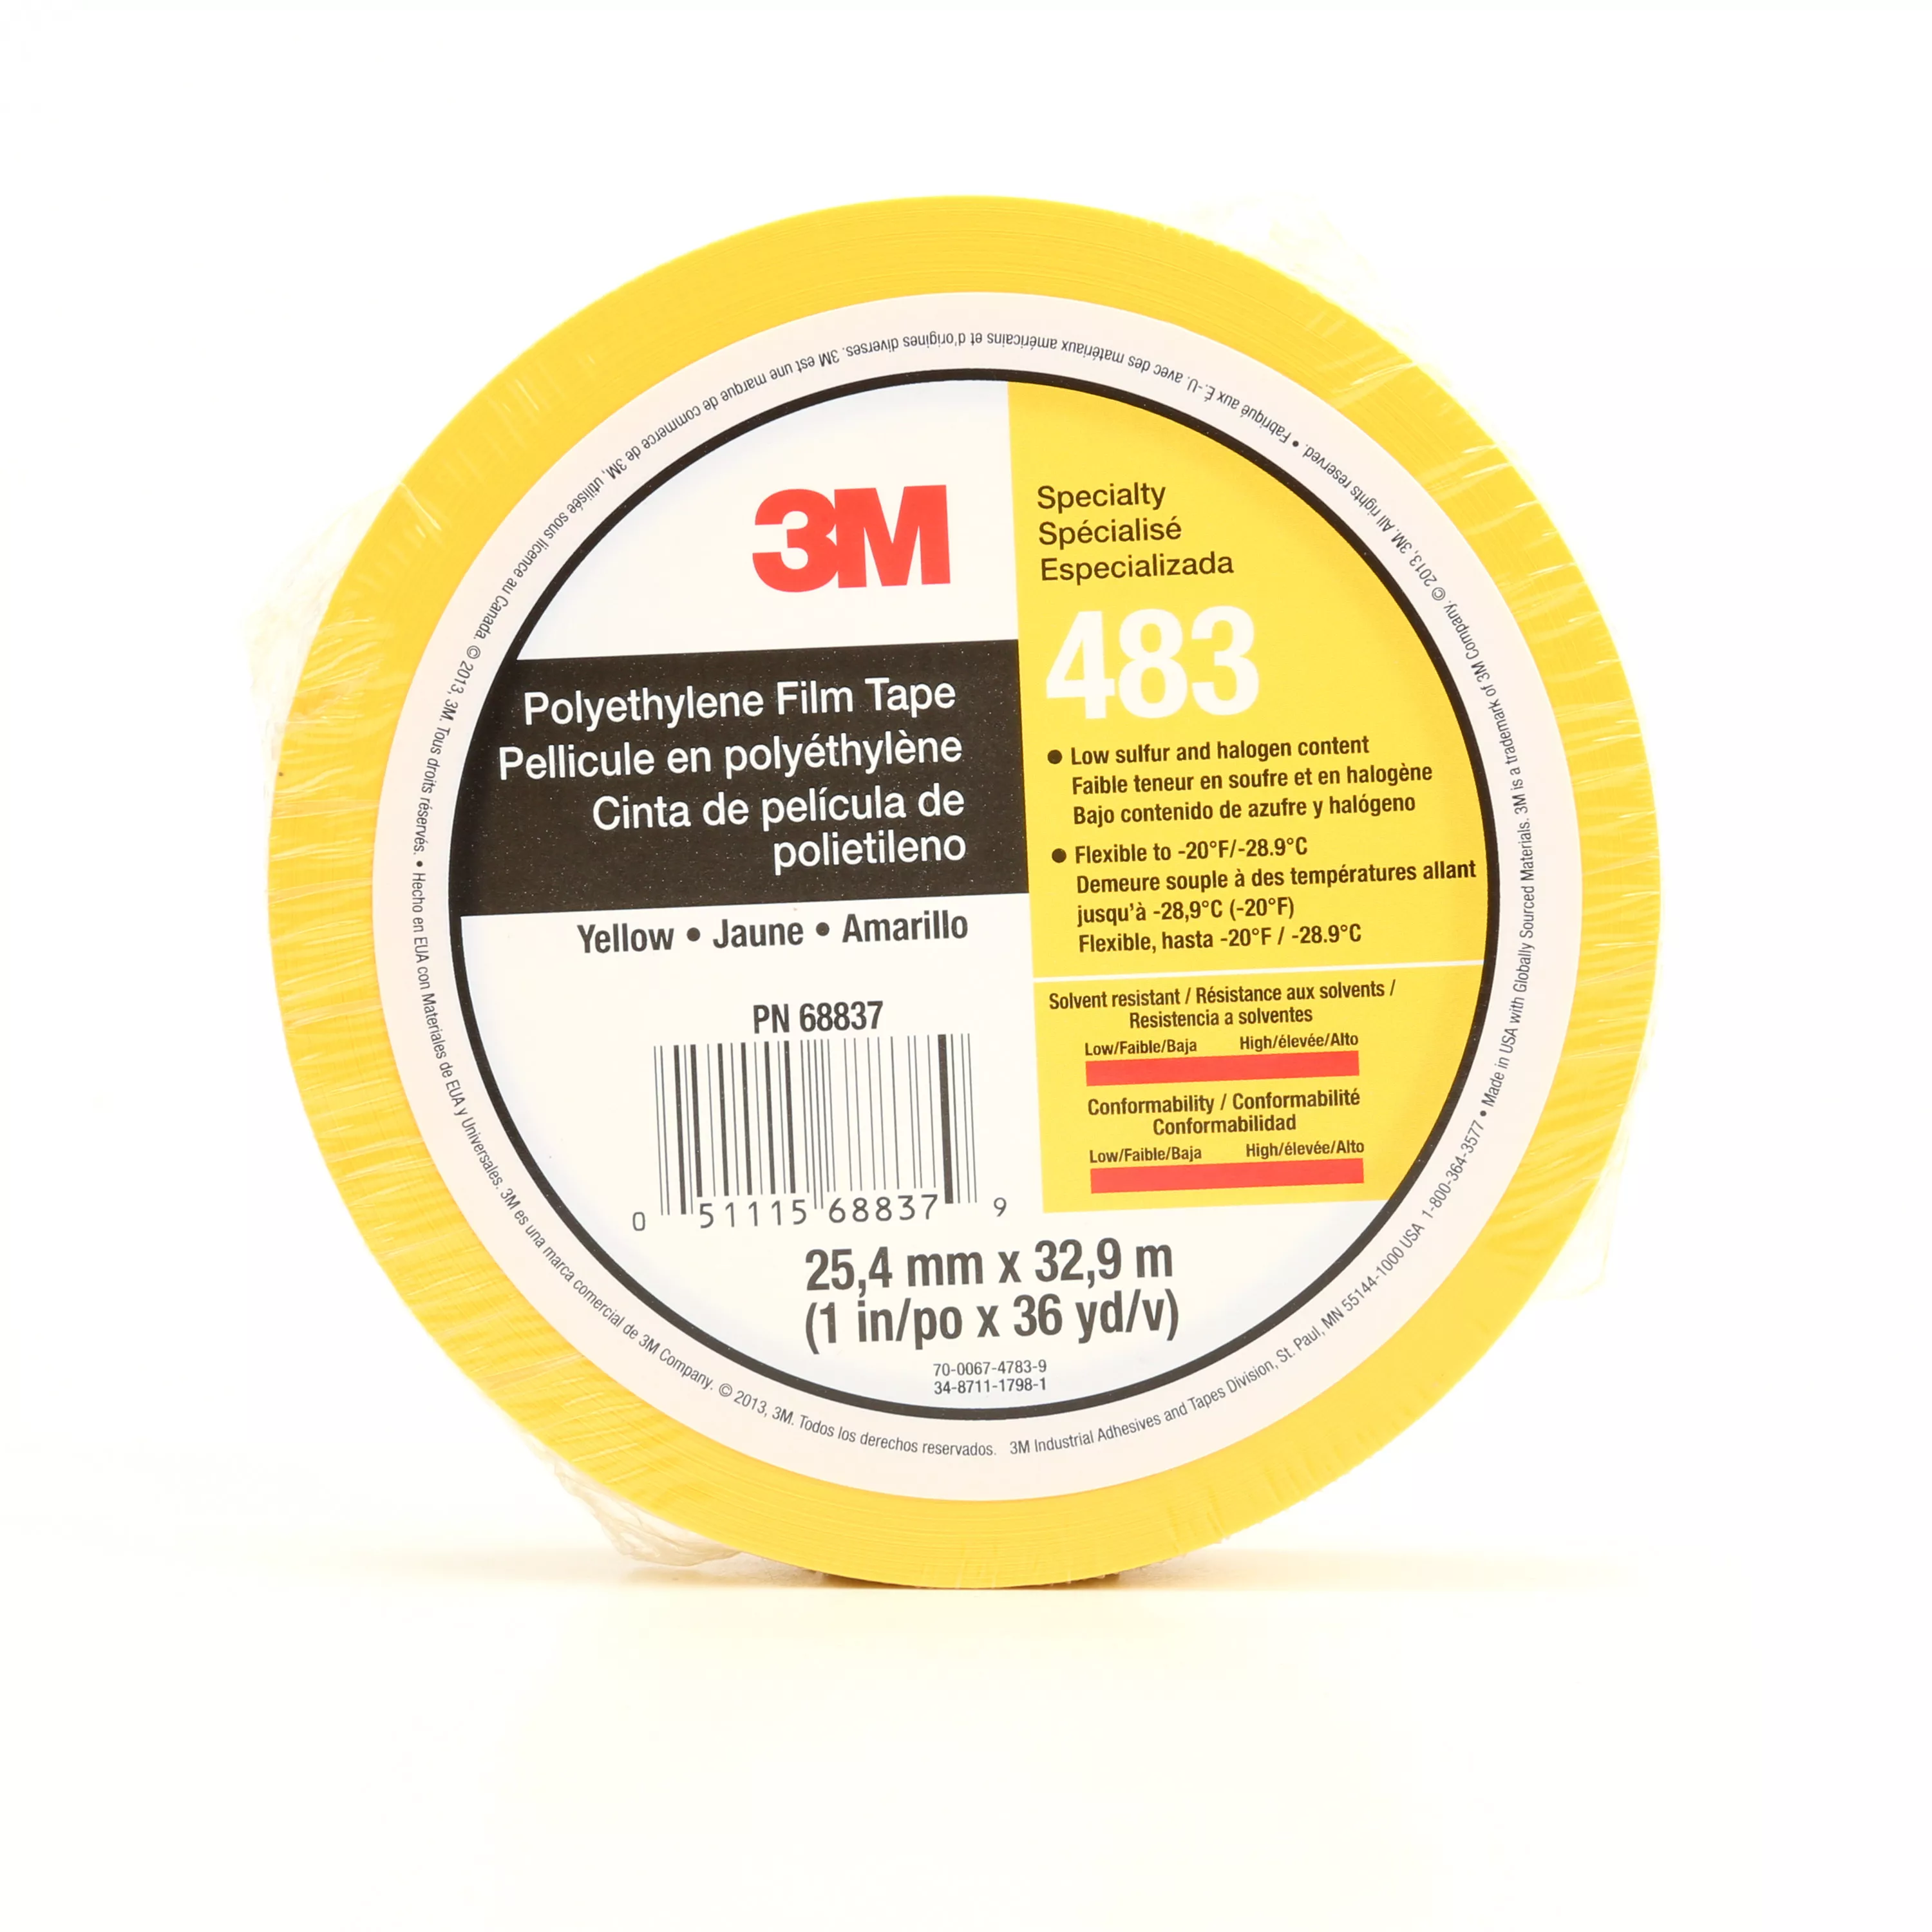 3M™ Polyethylene Tape 483, Yellow, 1 in x 36 yd, 5.0 mil, 36 Roll/Case,
Individually Wrapped Conveniently Packaged